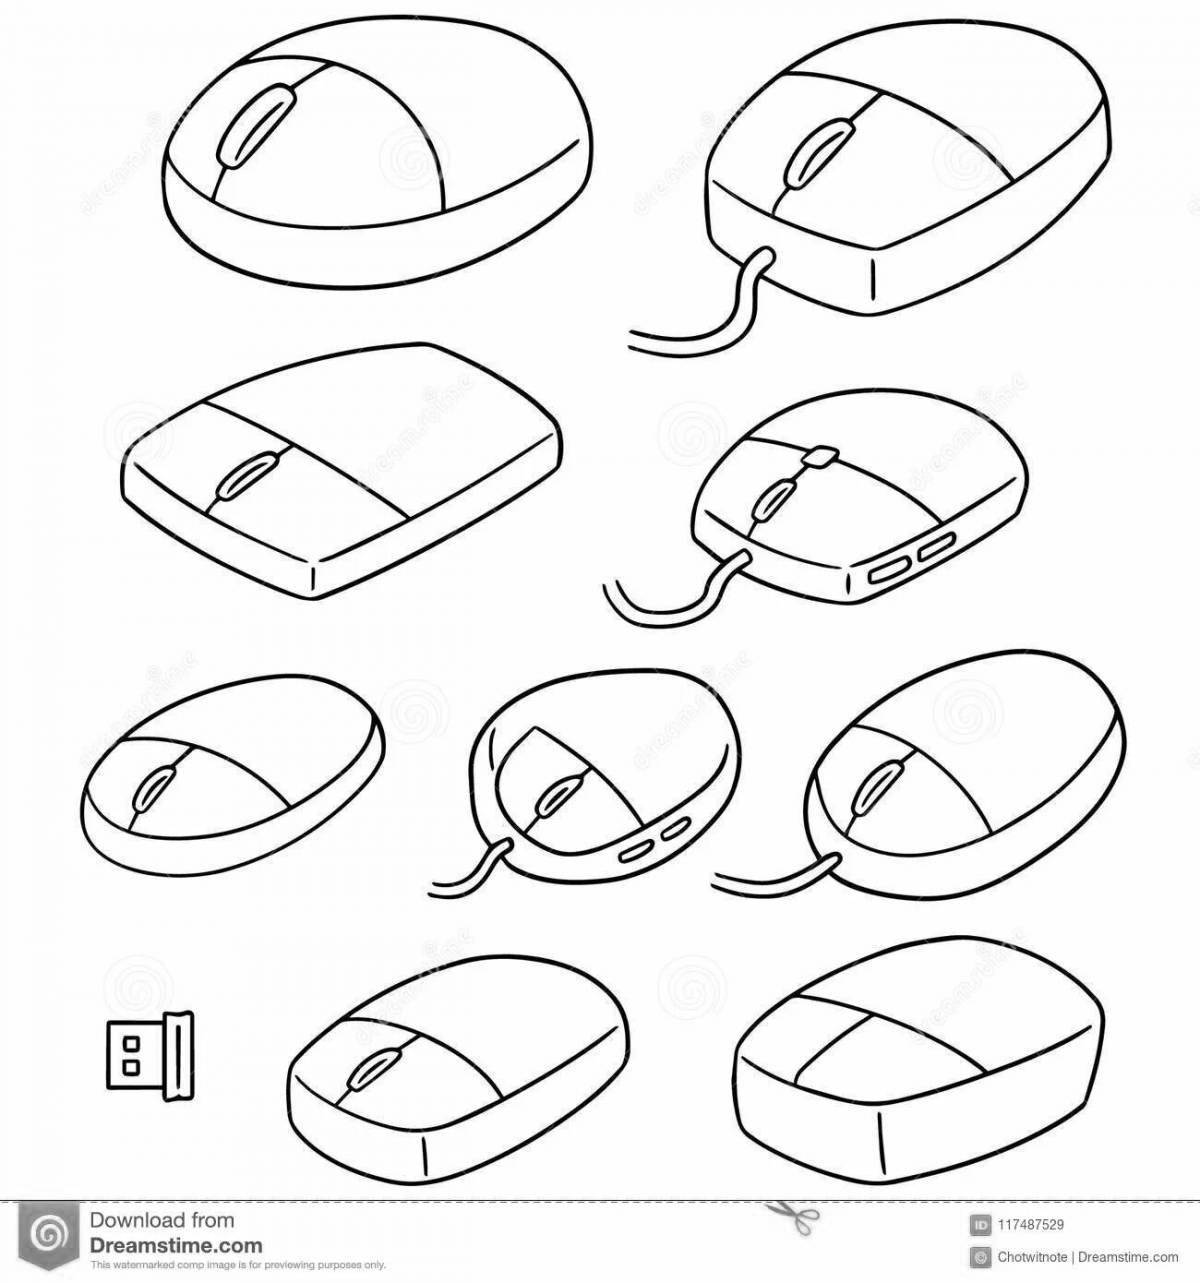 Creative mouse with glasses coloring book